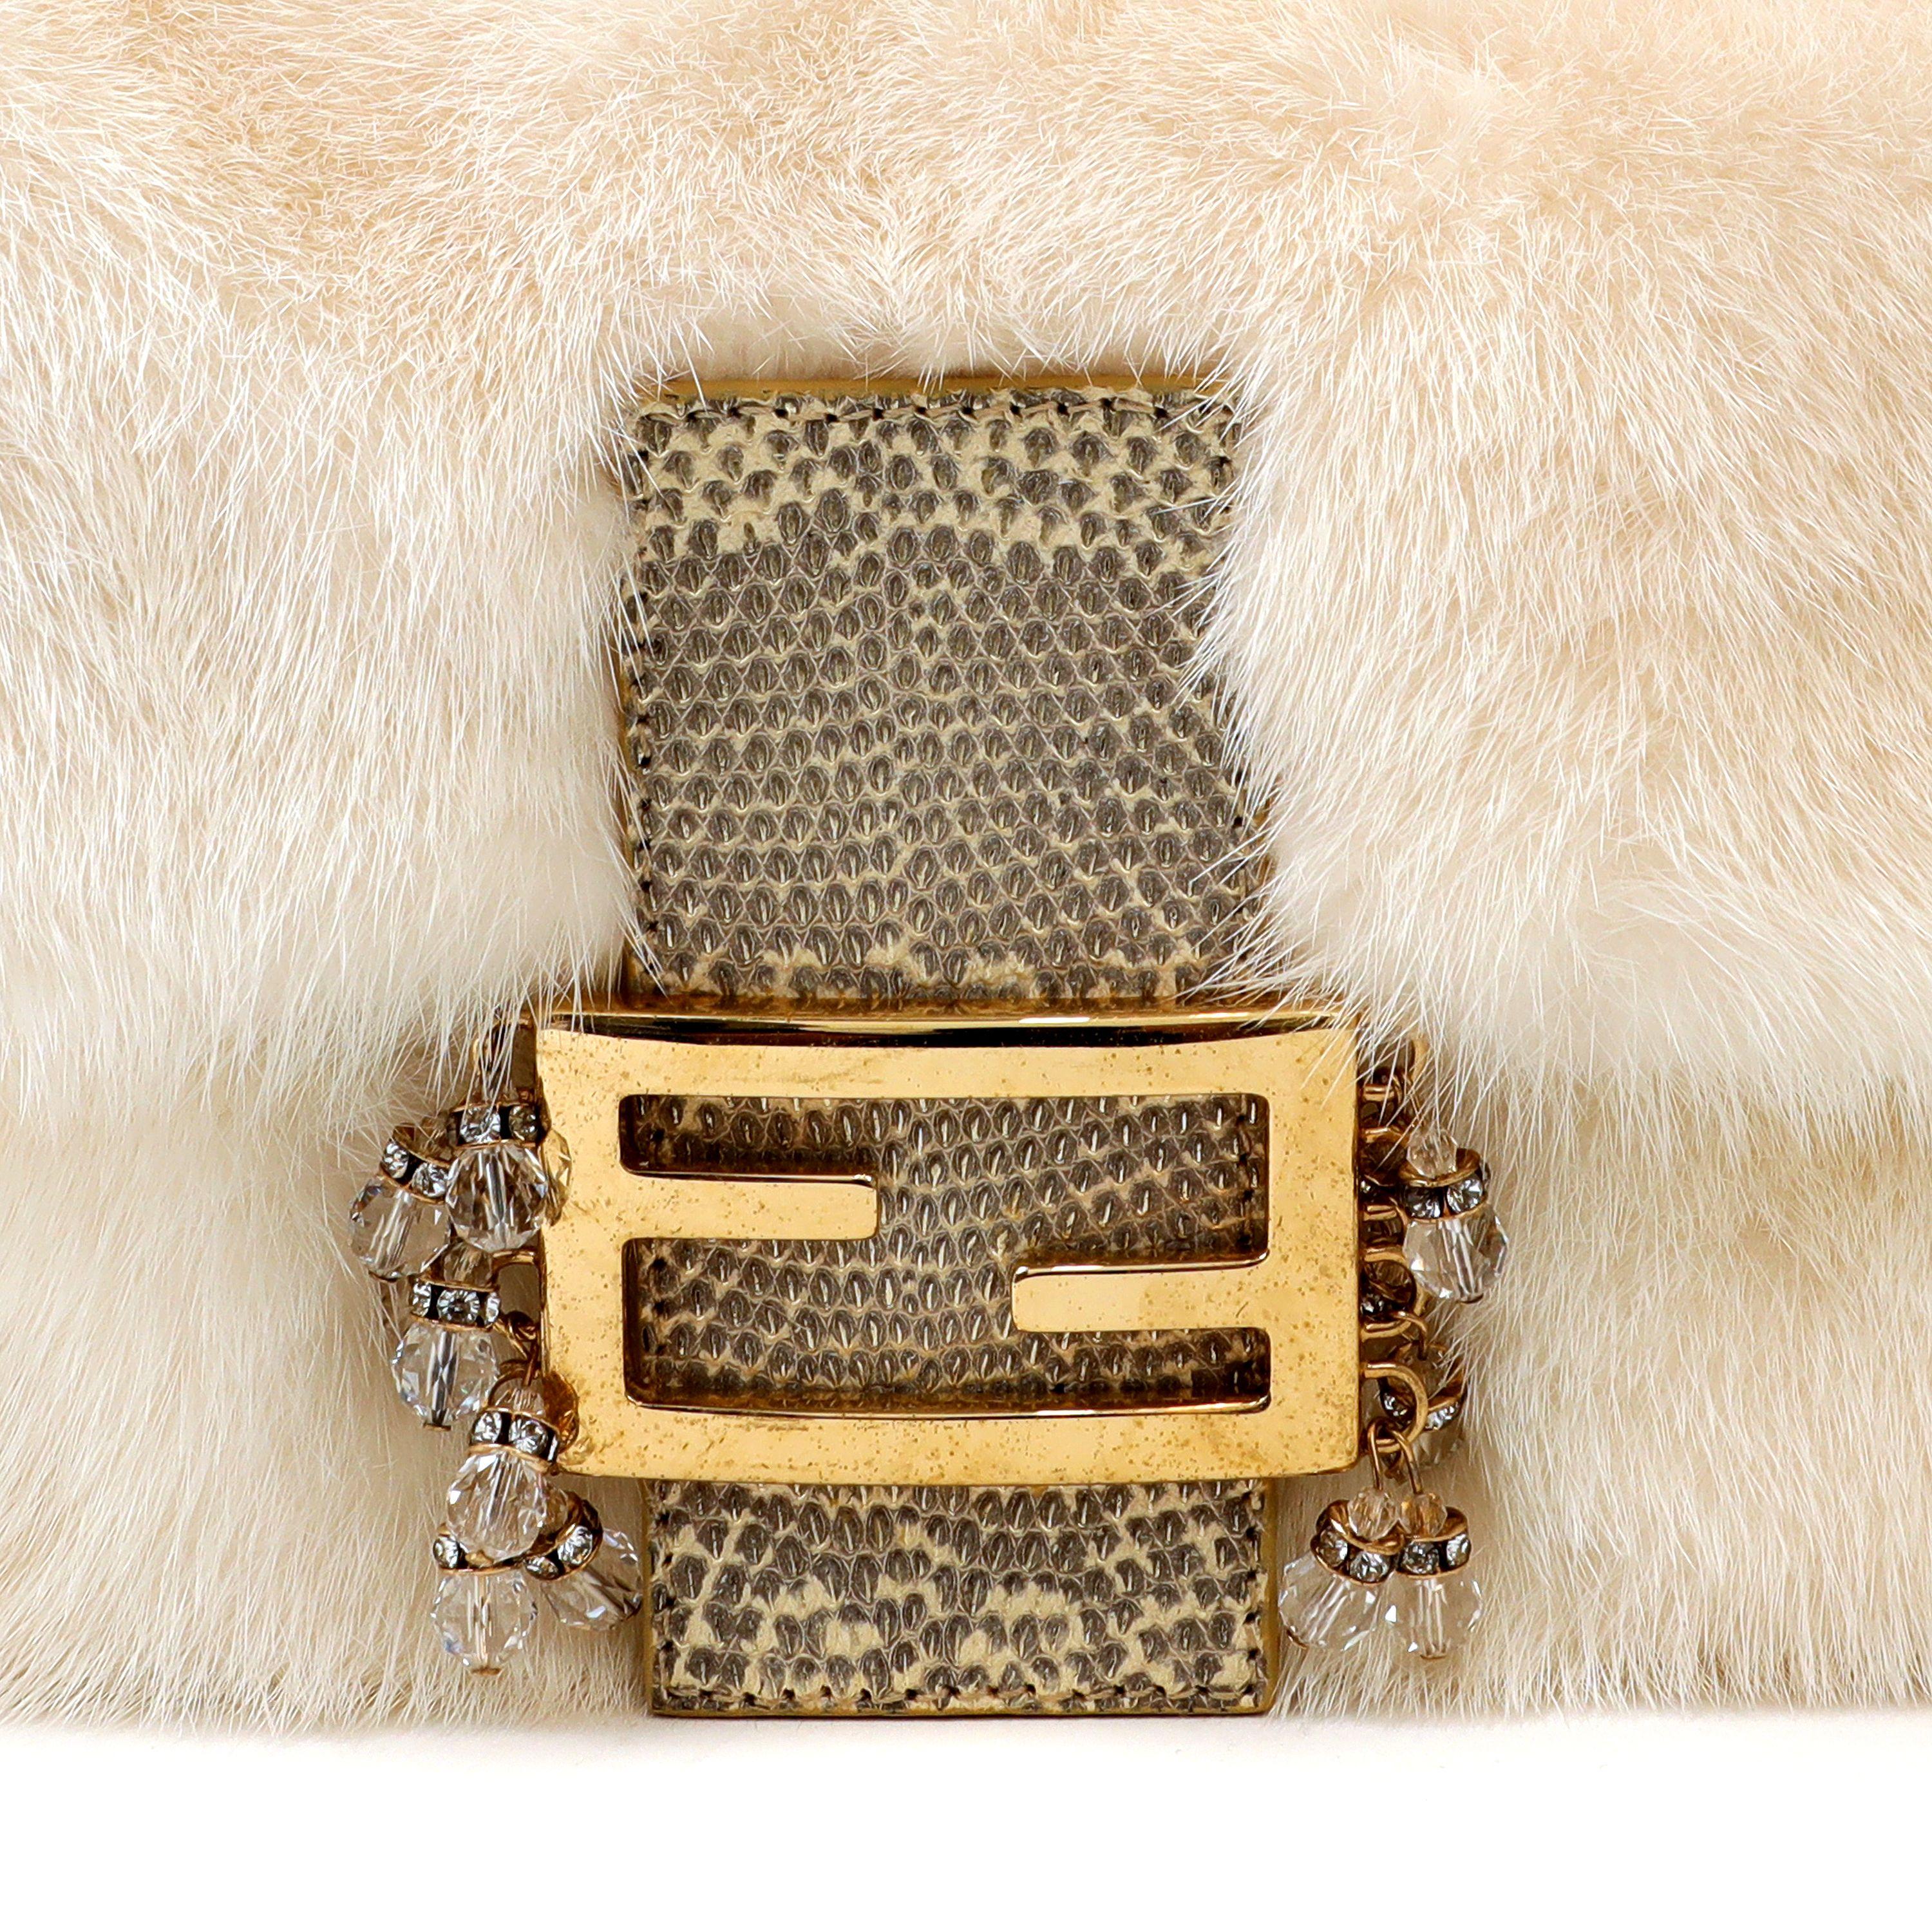 This authentic Fendi White Mink Baguette is in excellent condition.  An exotic version of the iconic Baguette, it features snowy white mink fur with gold hardware.  The Fendi logo clasp is embellished with ombre lizard skin and crystals.  Dust bag